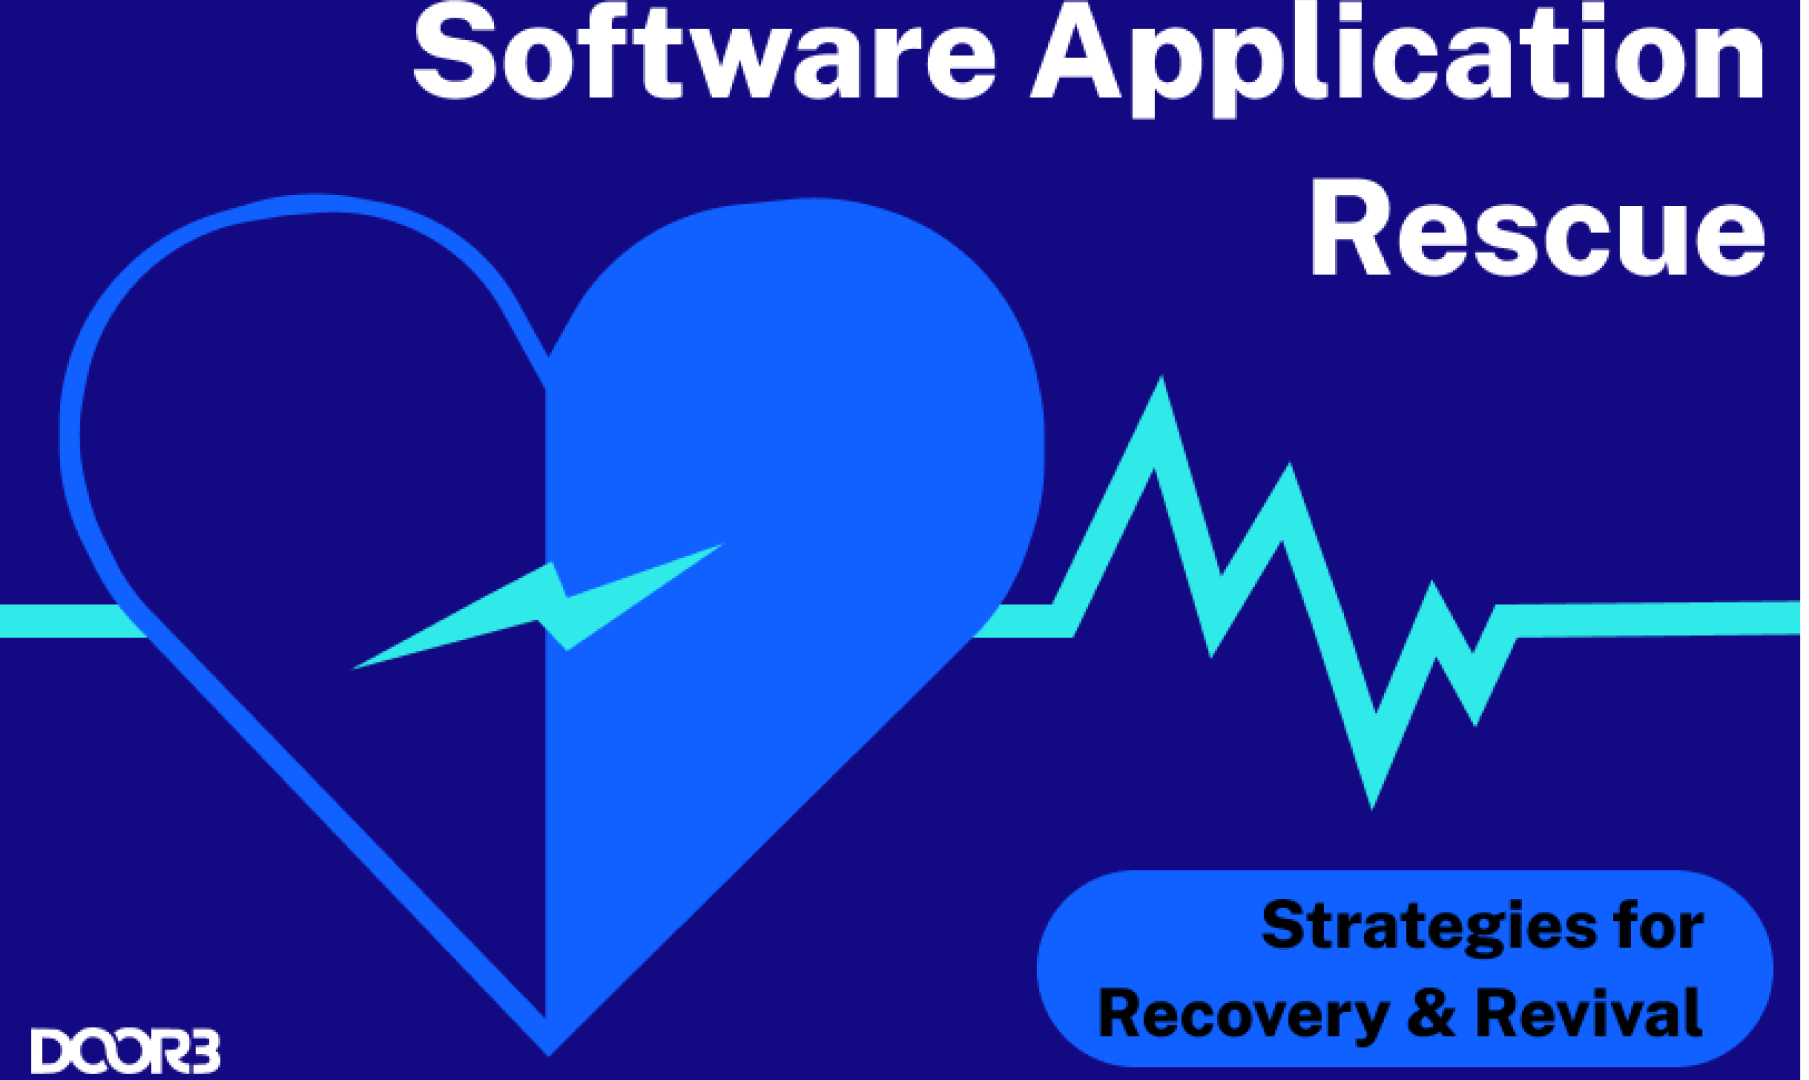 Software Application Rescue: Strategies for Recovery & Revival